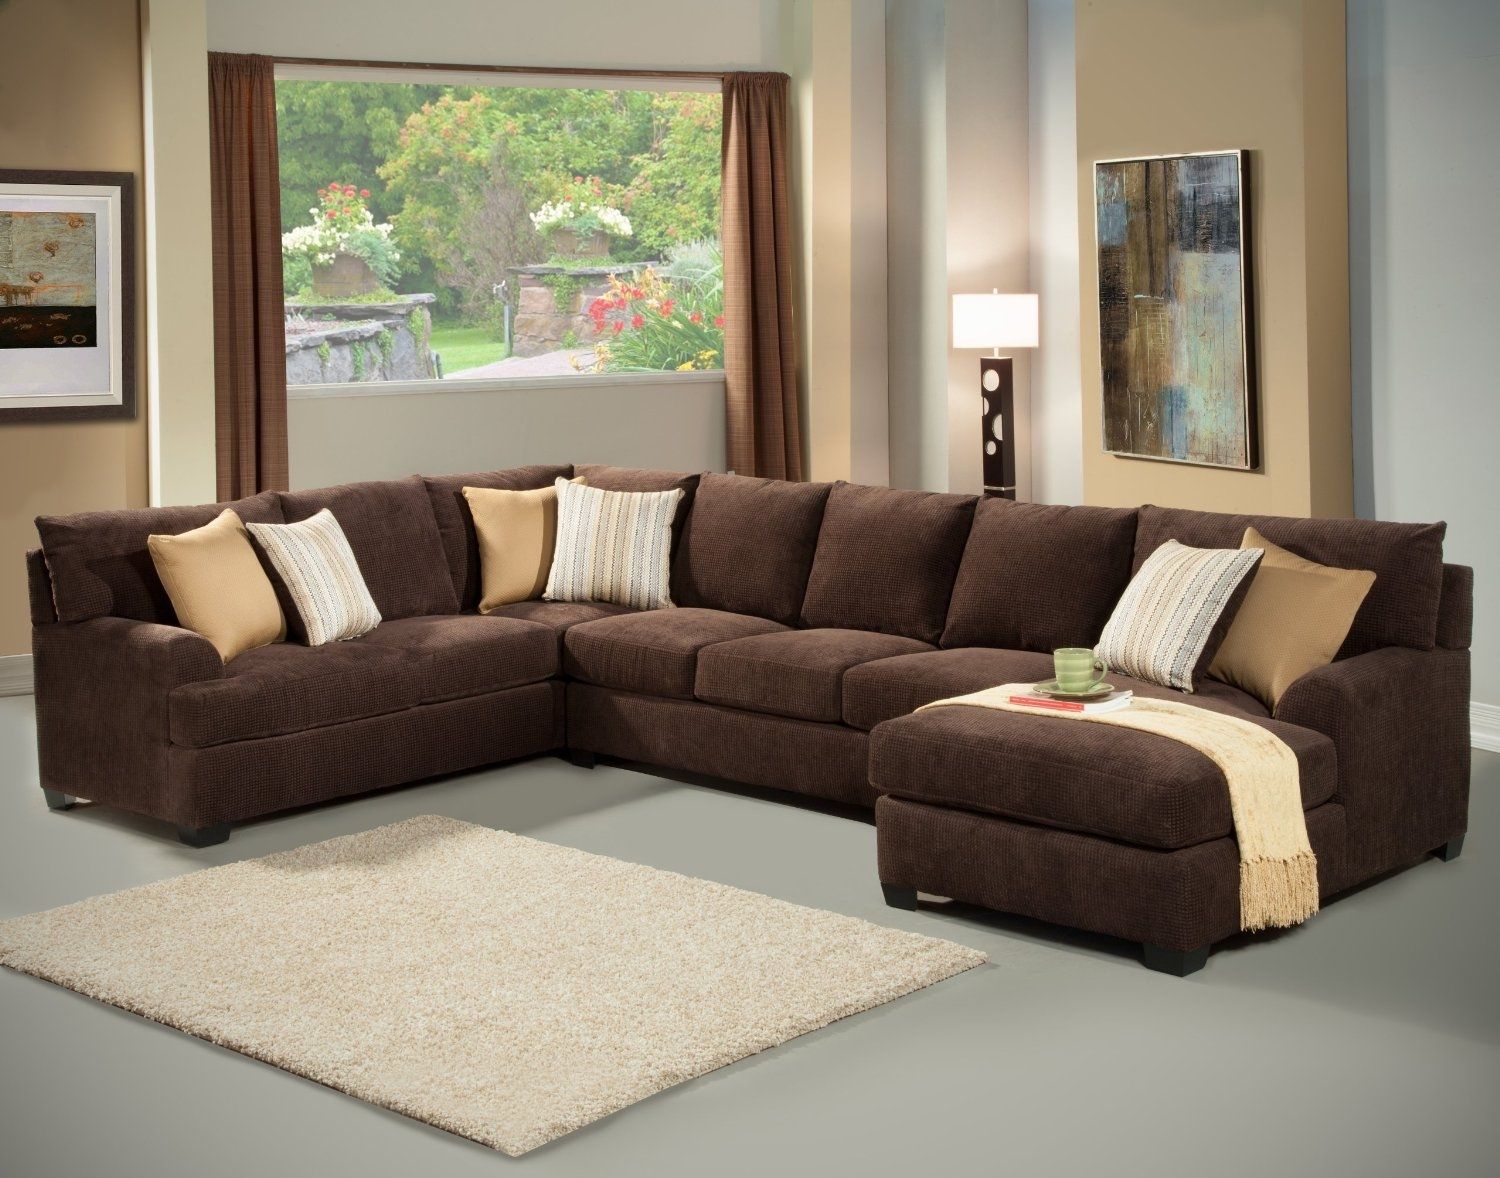 Cheap Sectional Sofas Houston Tx 55 With Cheap Sectional Sofas With Regard To Houston Tx Sectional Sofas (View 6 of 10)